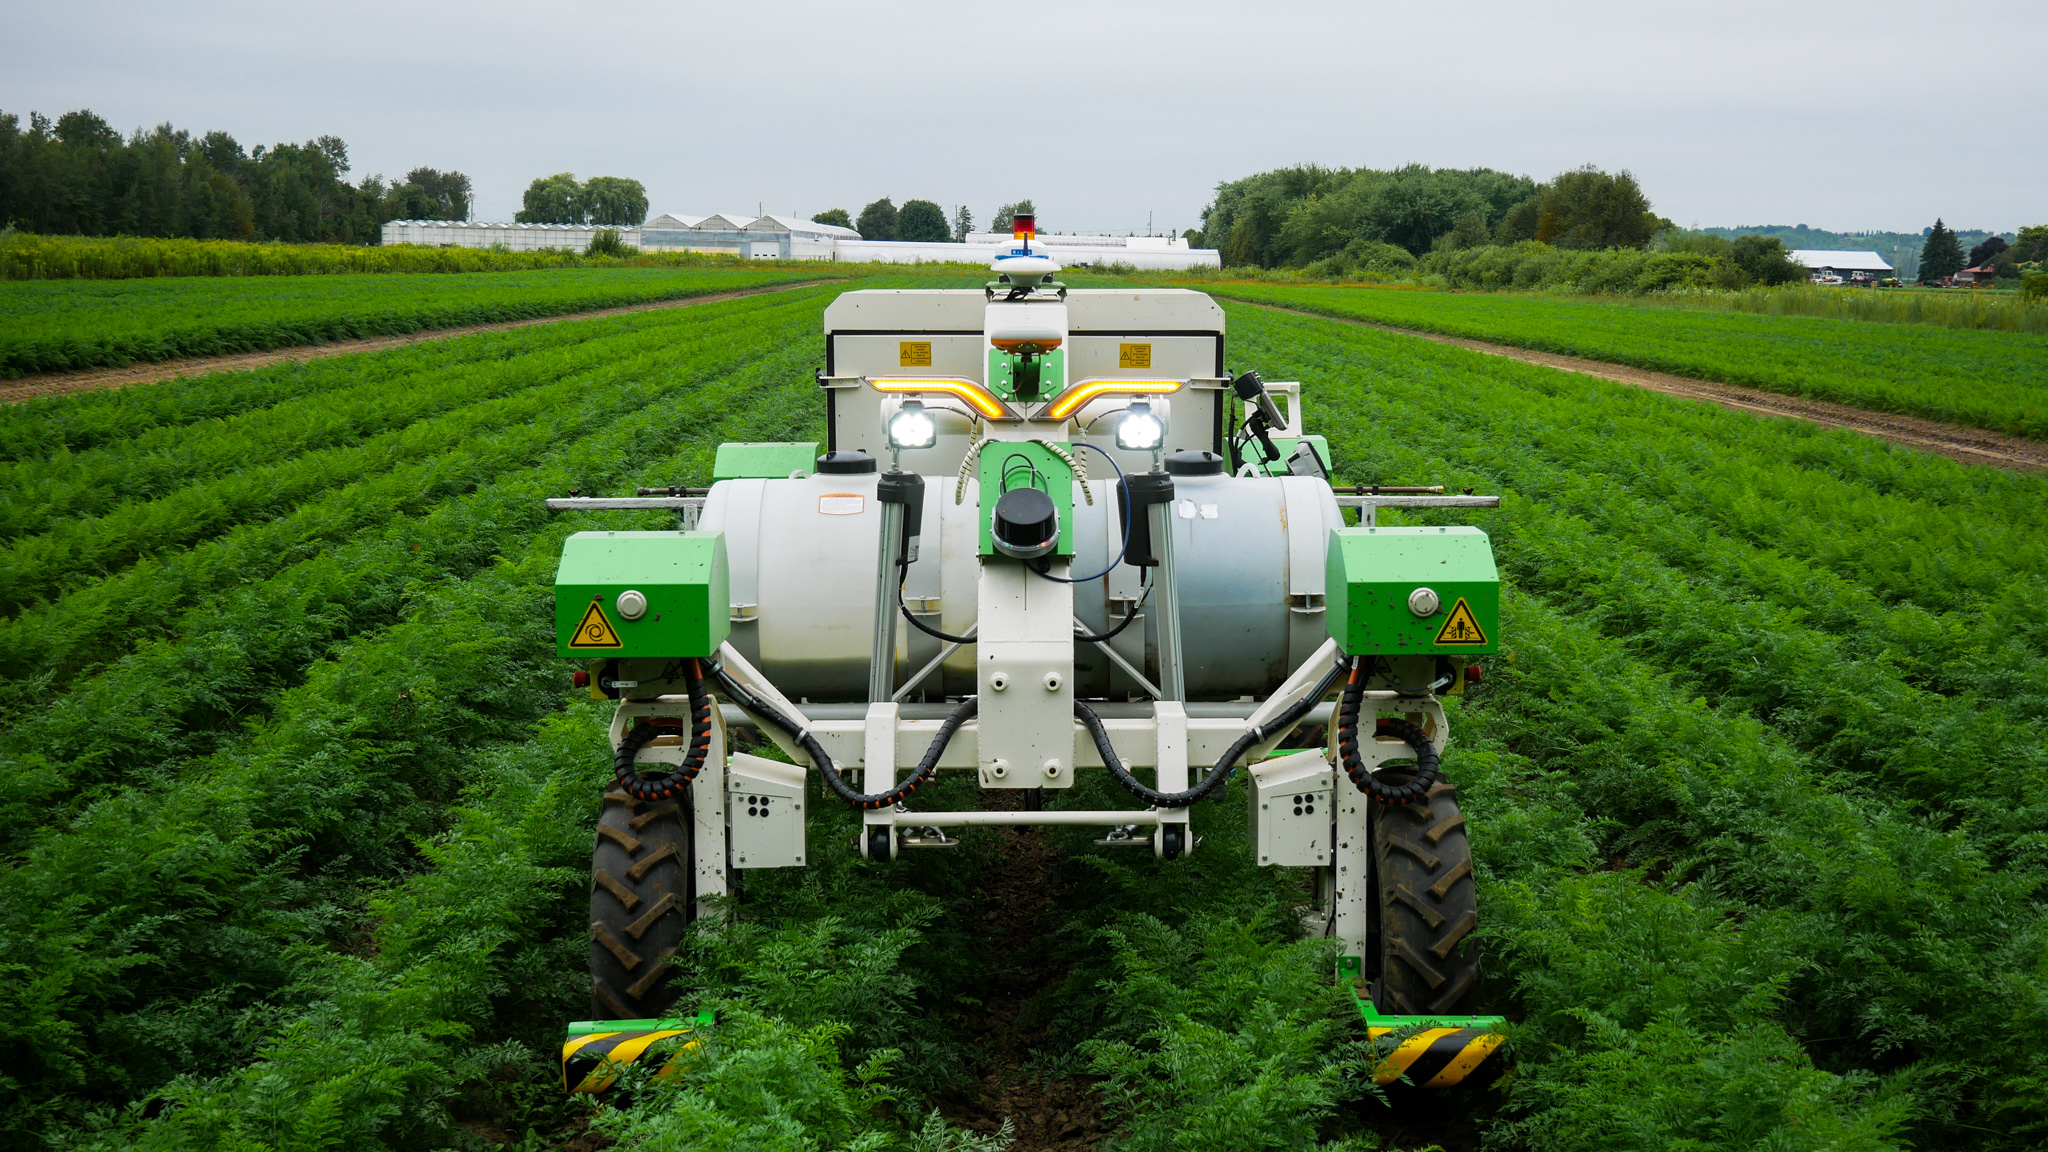  A green and silver custom sprayer applying fungicides and fertilizer in a green field of carrots in the Holland Marsh.